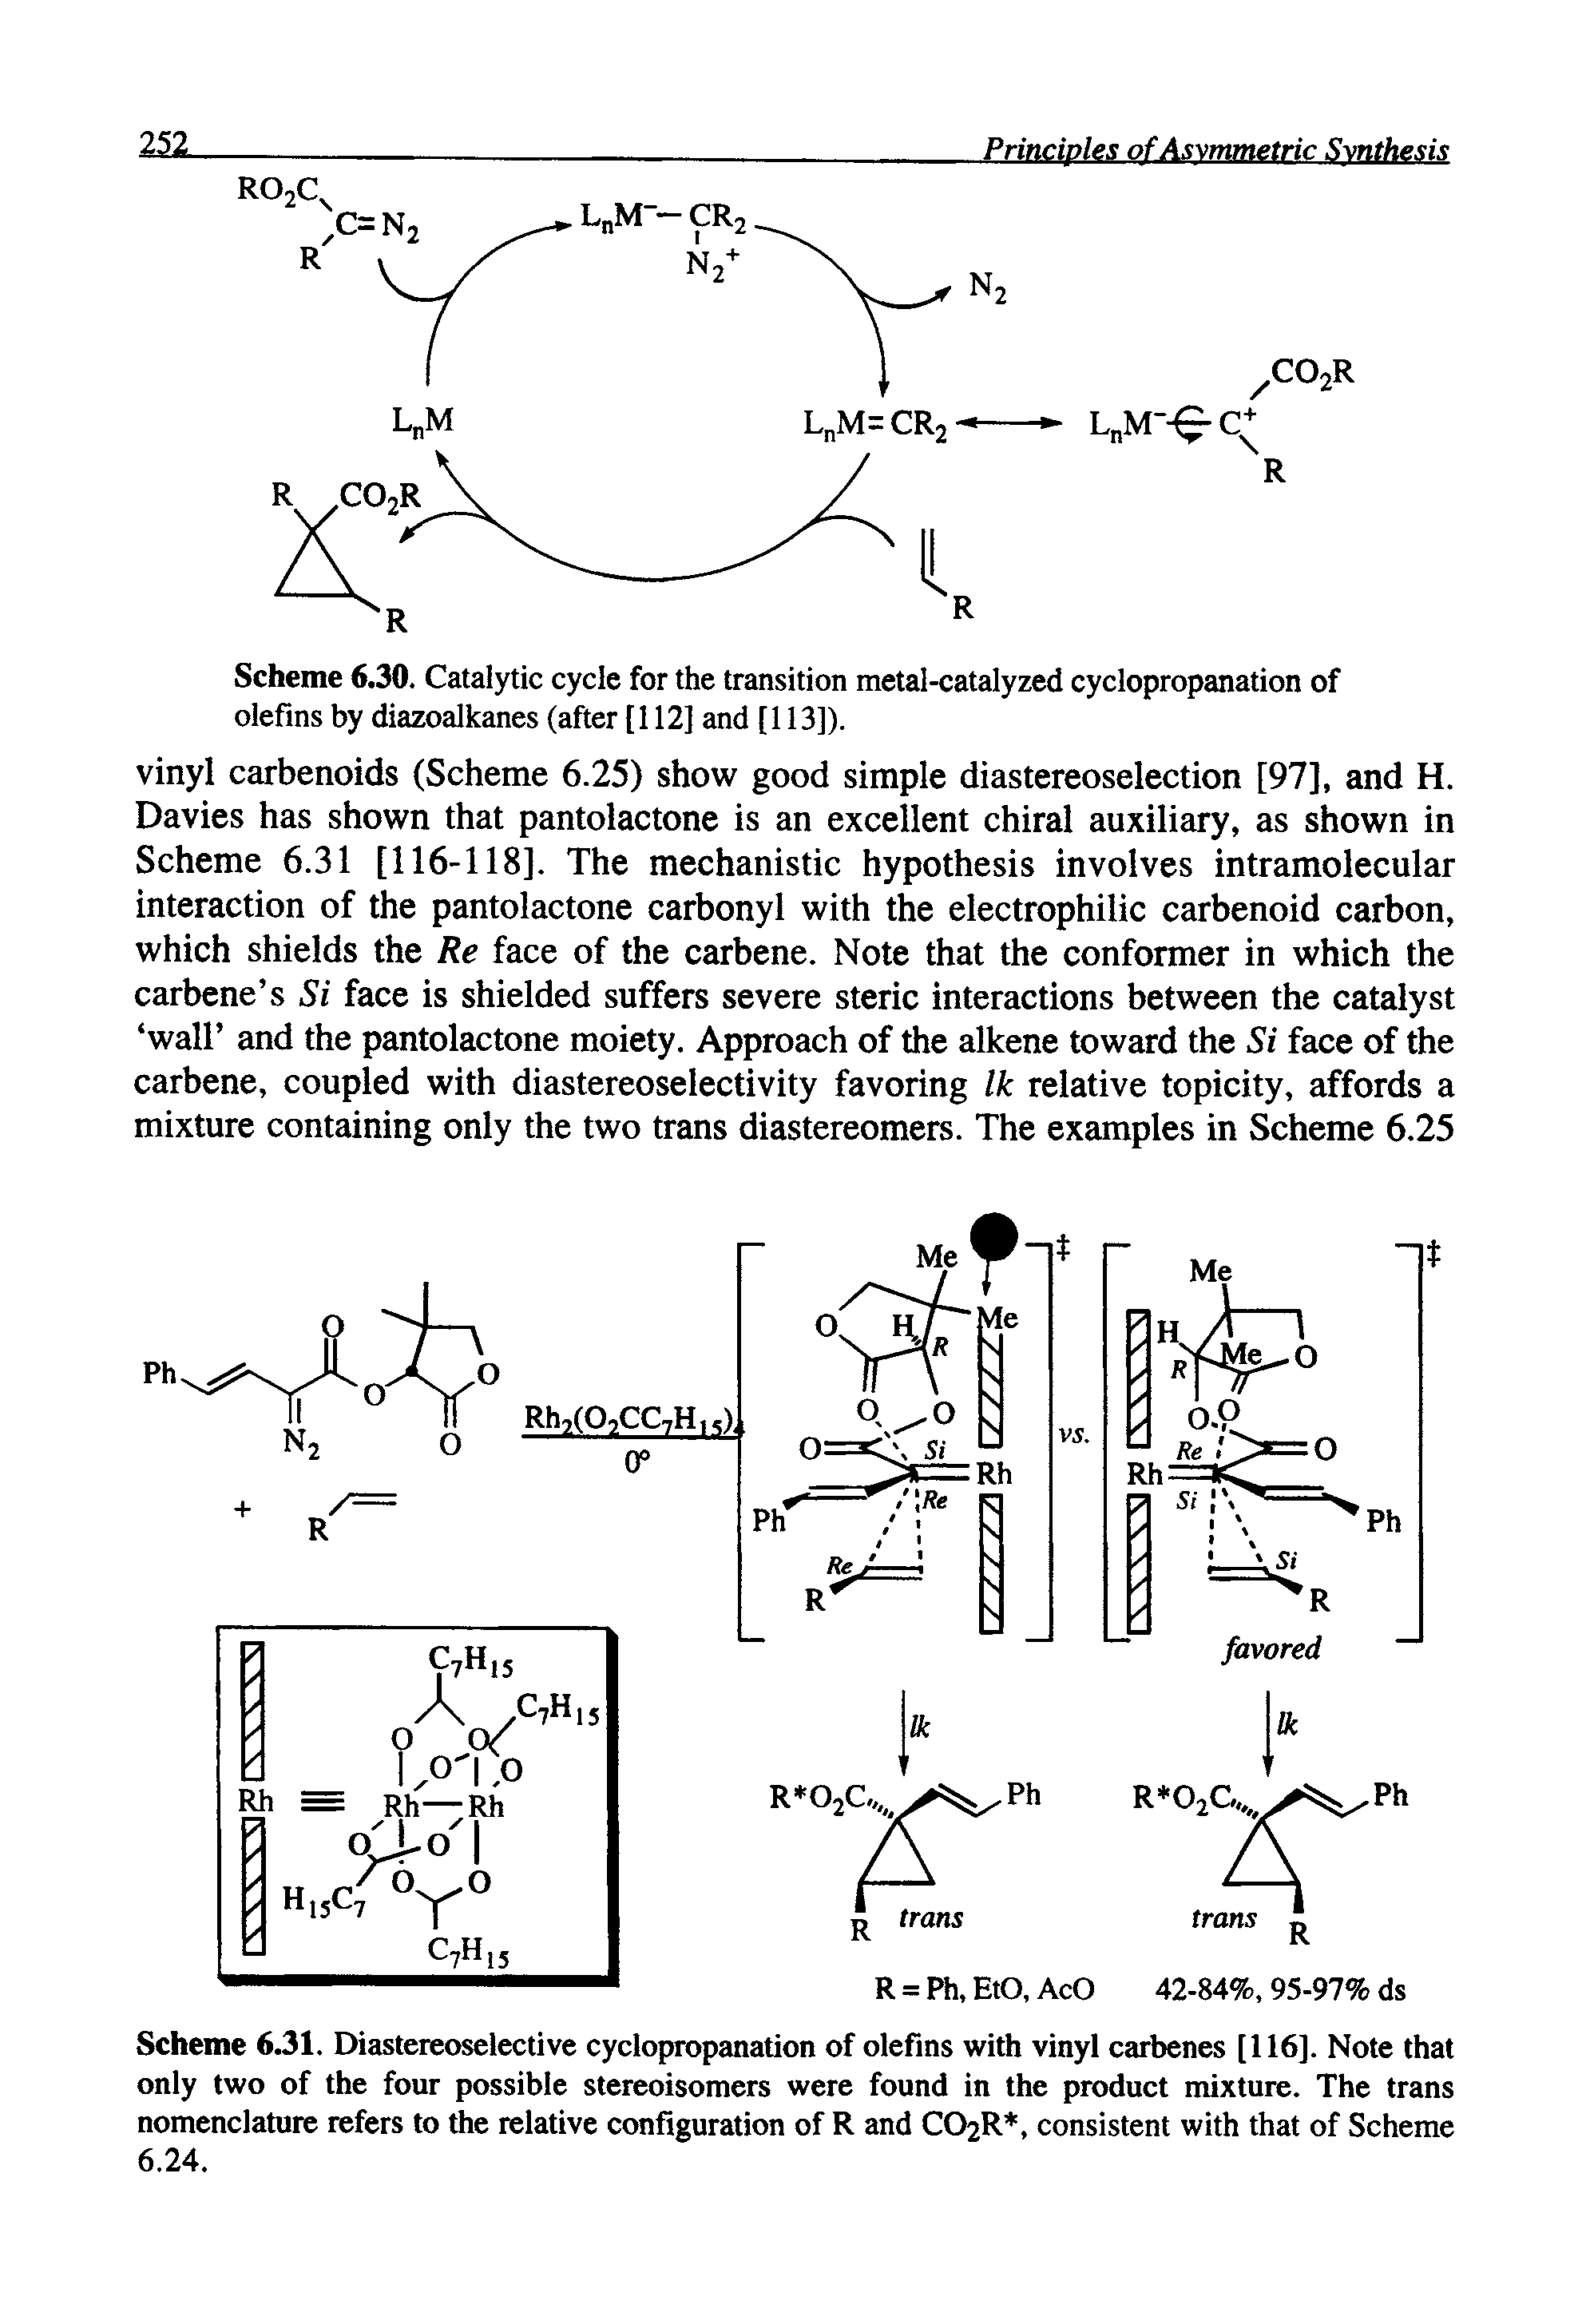 Scheme 6.30. Catalytic cycle for the transition metal-catalyzed cyclopropanation of olefins by diazoalkanes (after [112] and [113]).